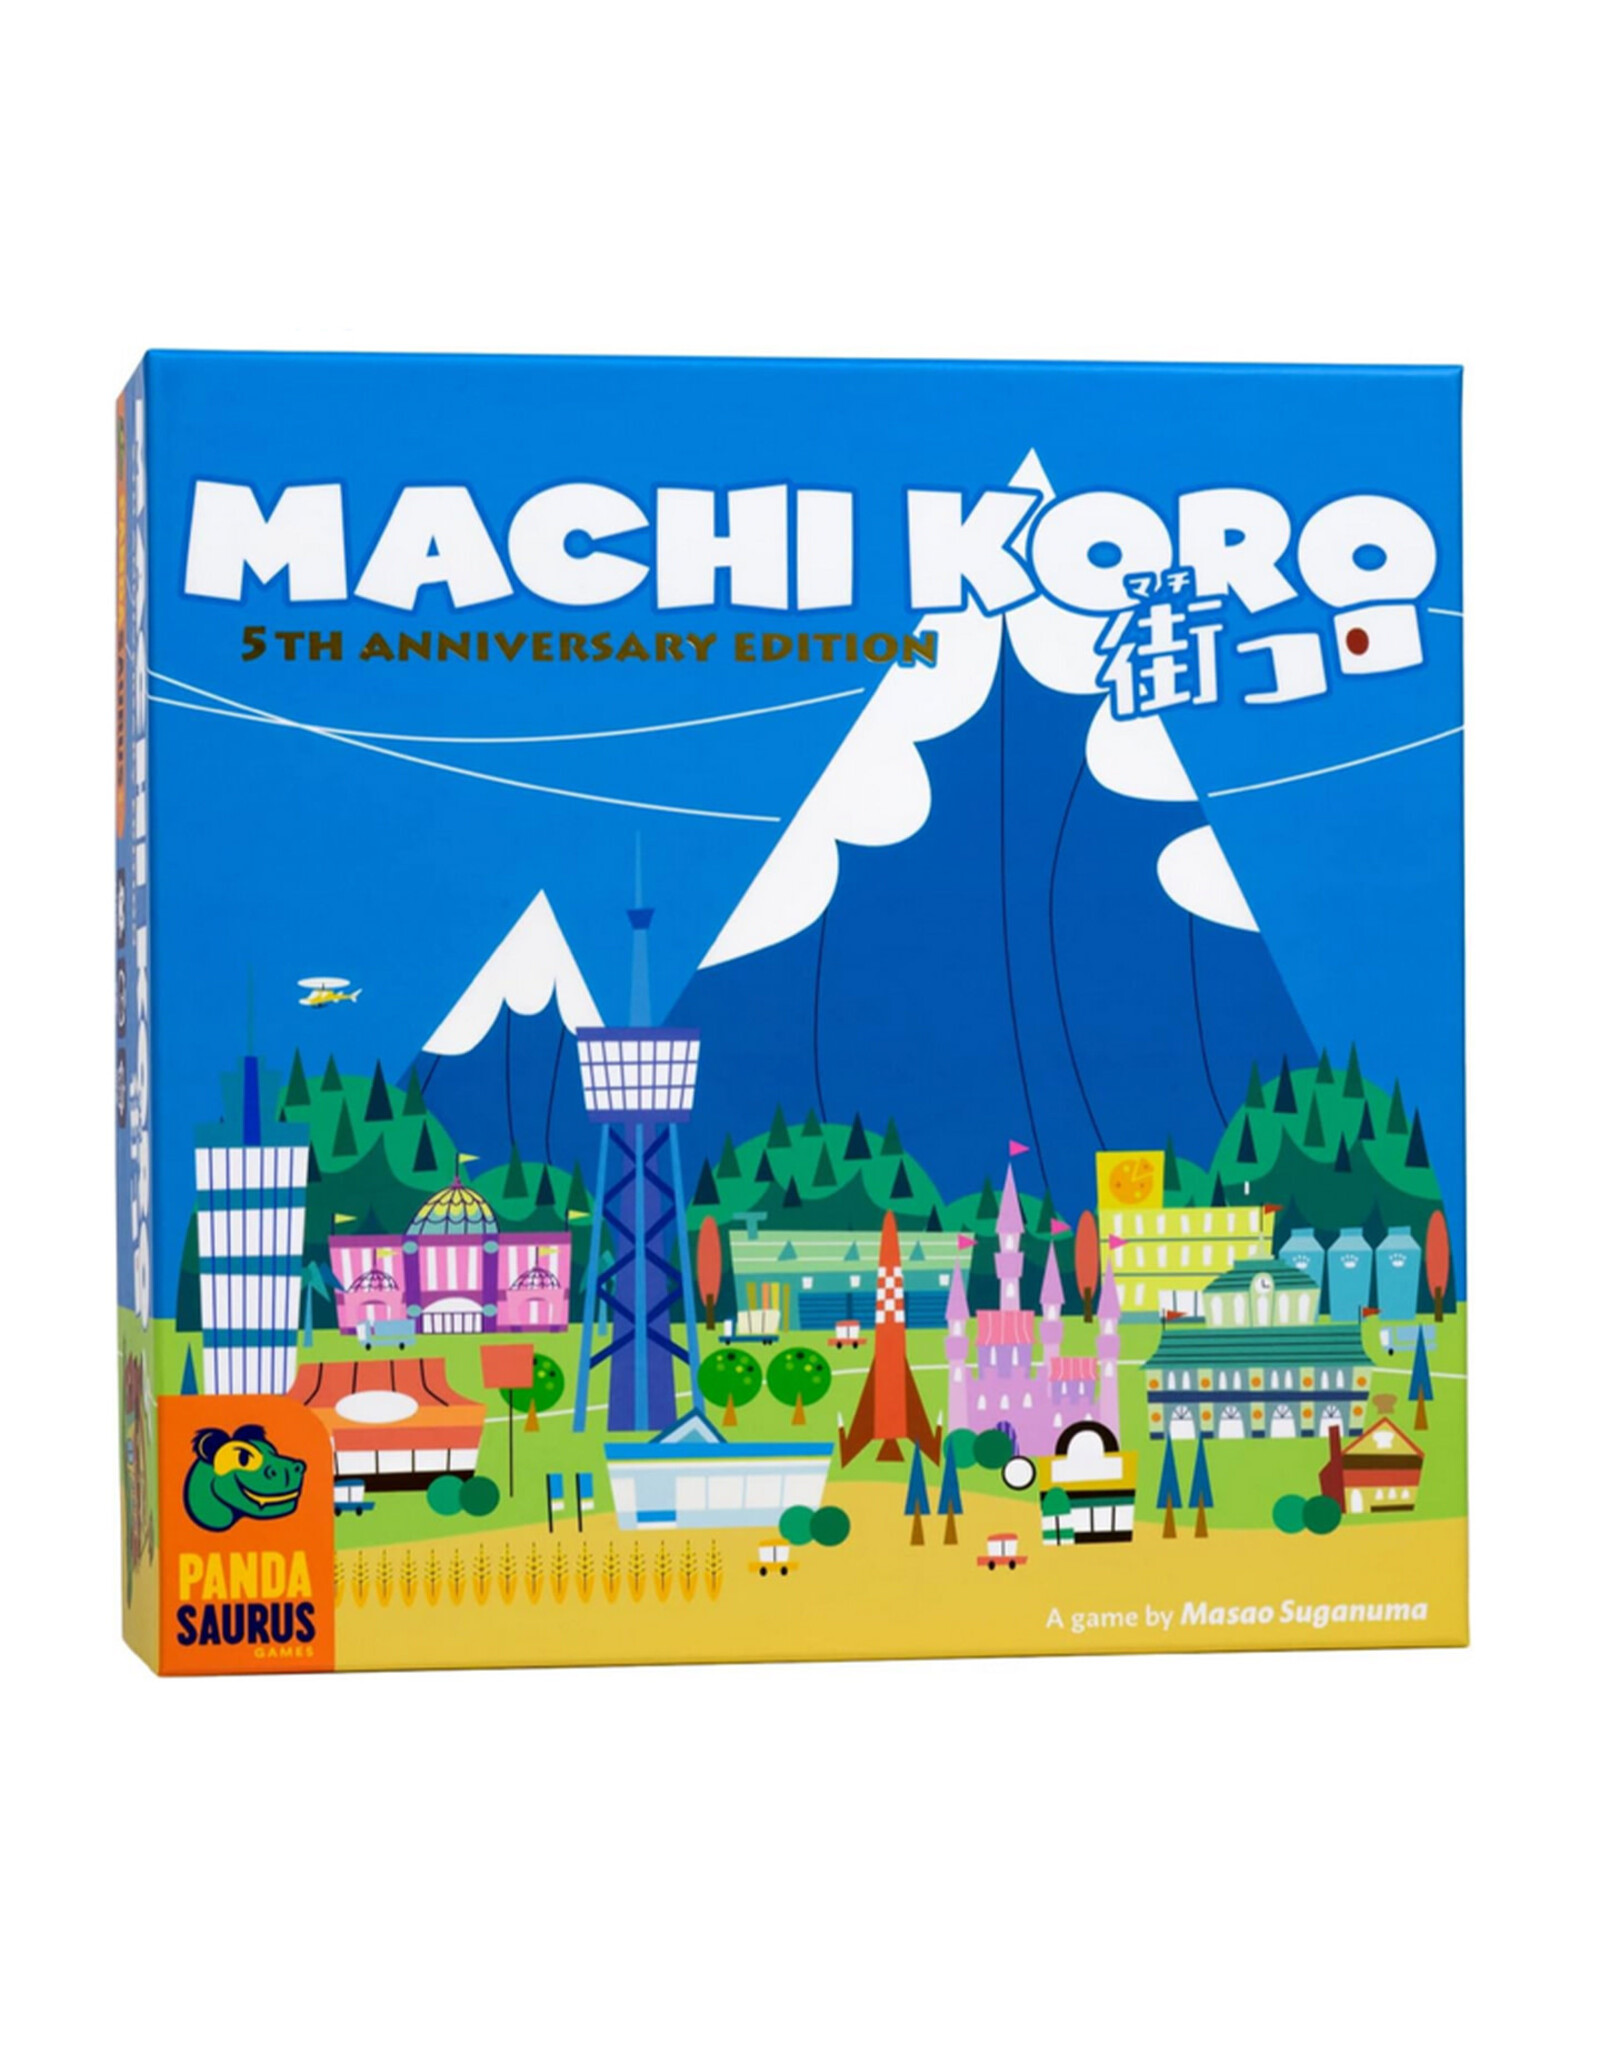 Machi Koro: The Ultimate City Building Game